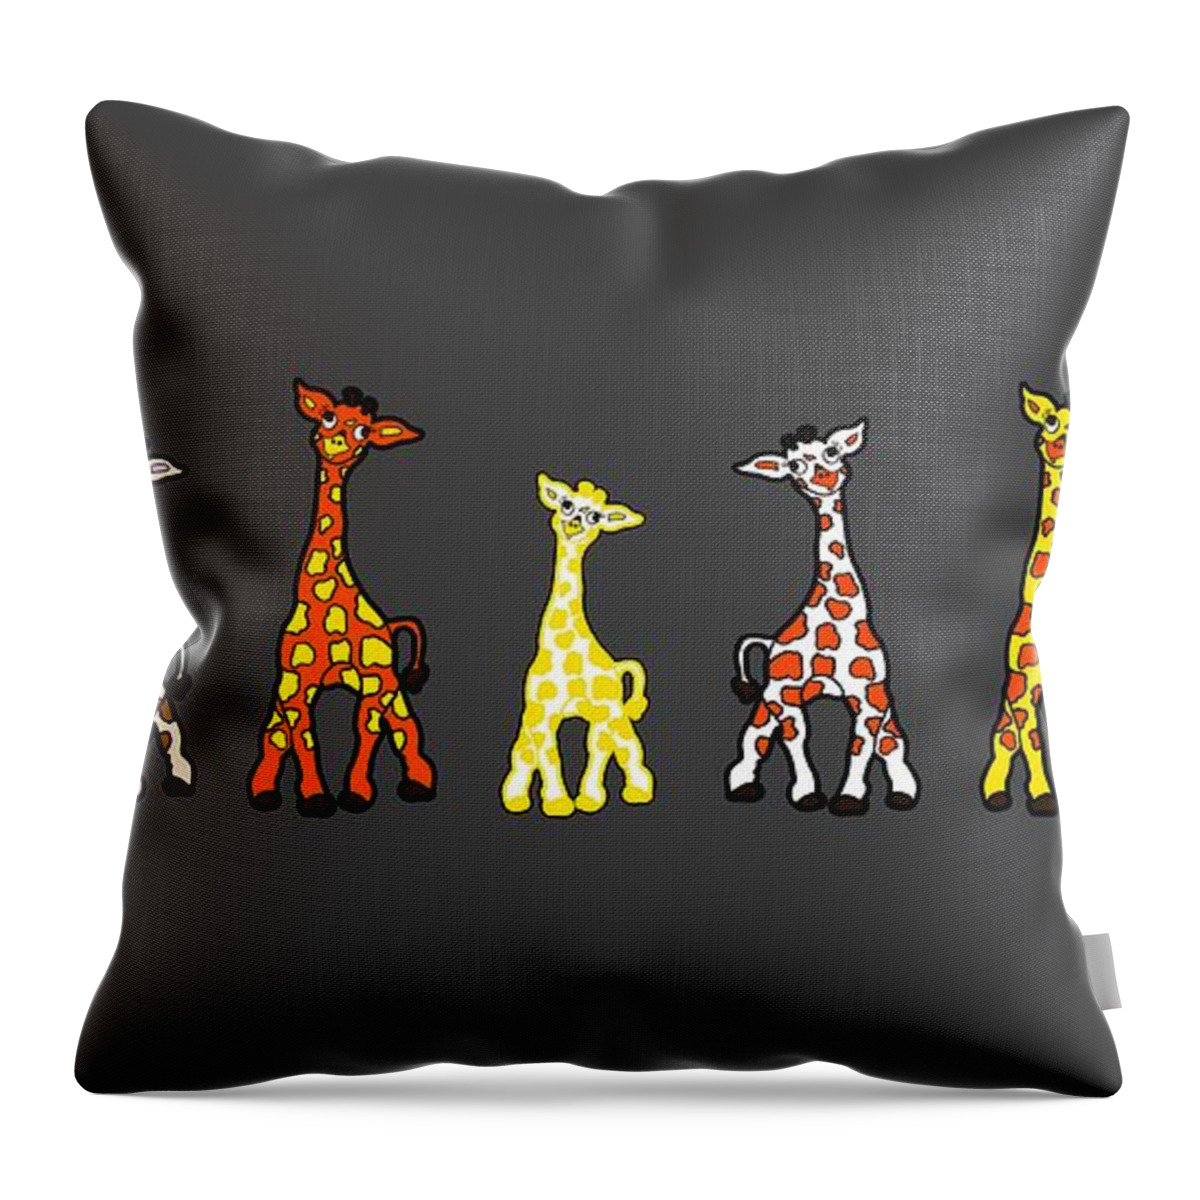 Giraffes Throw Pillow featuring the drawing Baby Giraffes In A Row by Rachel Lowry